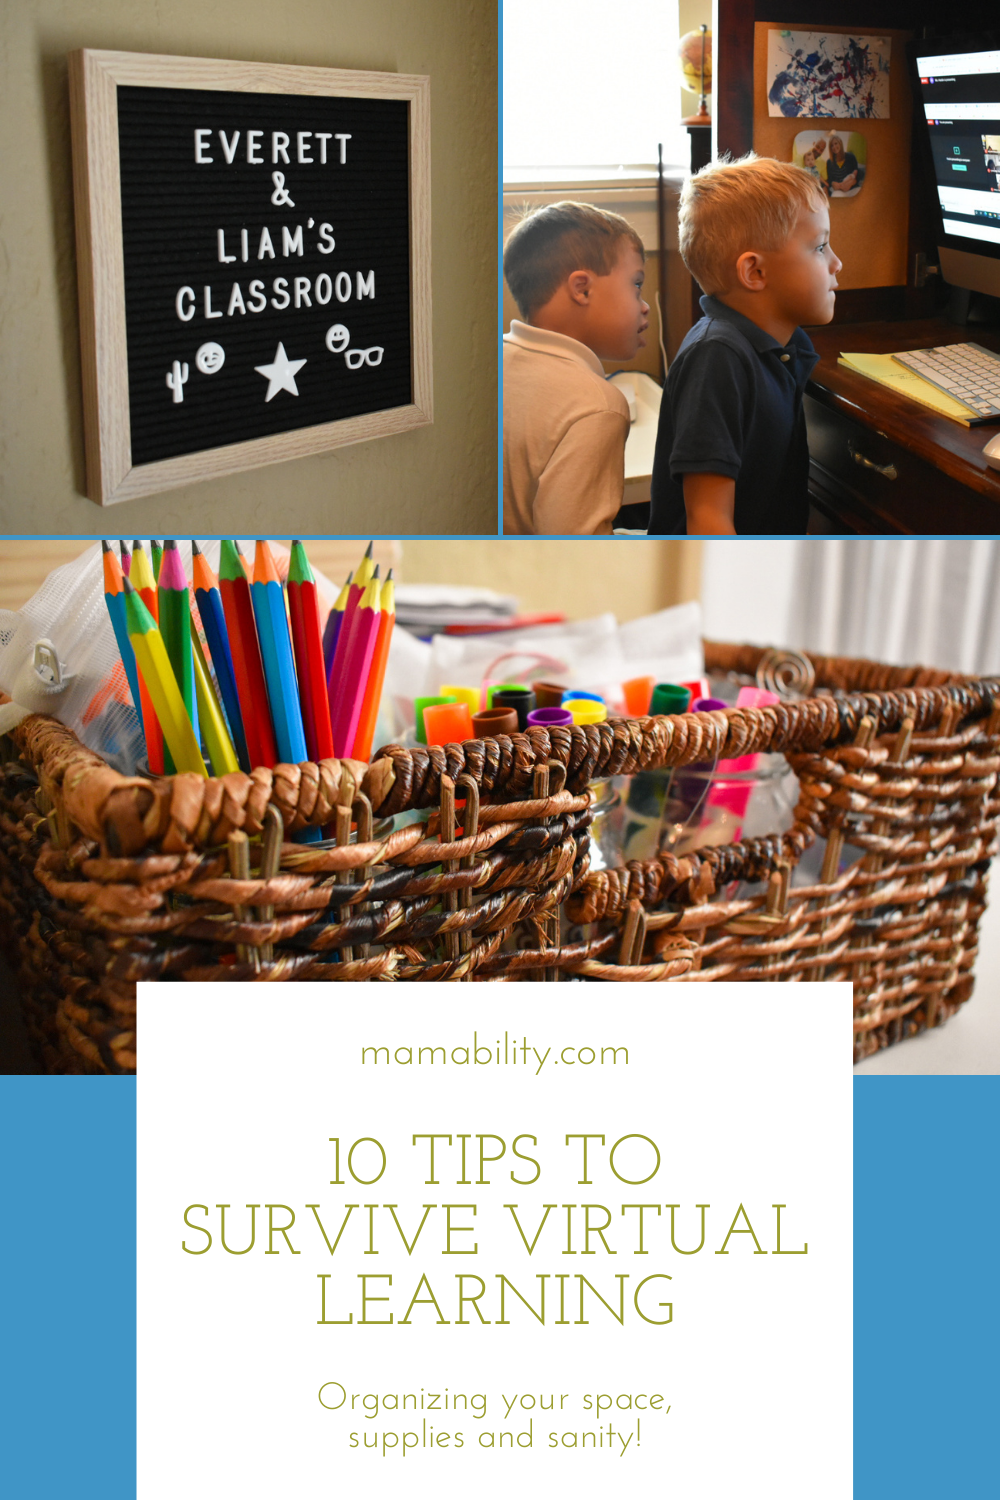 10 Tips to Survive Virtual Learning